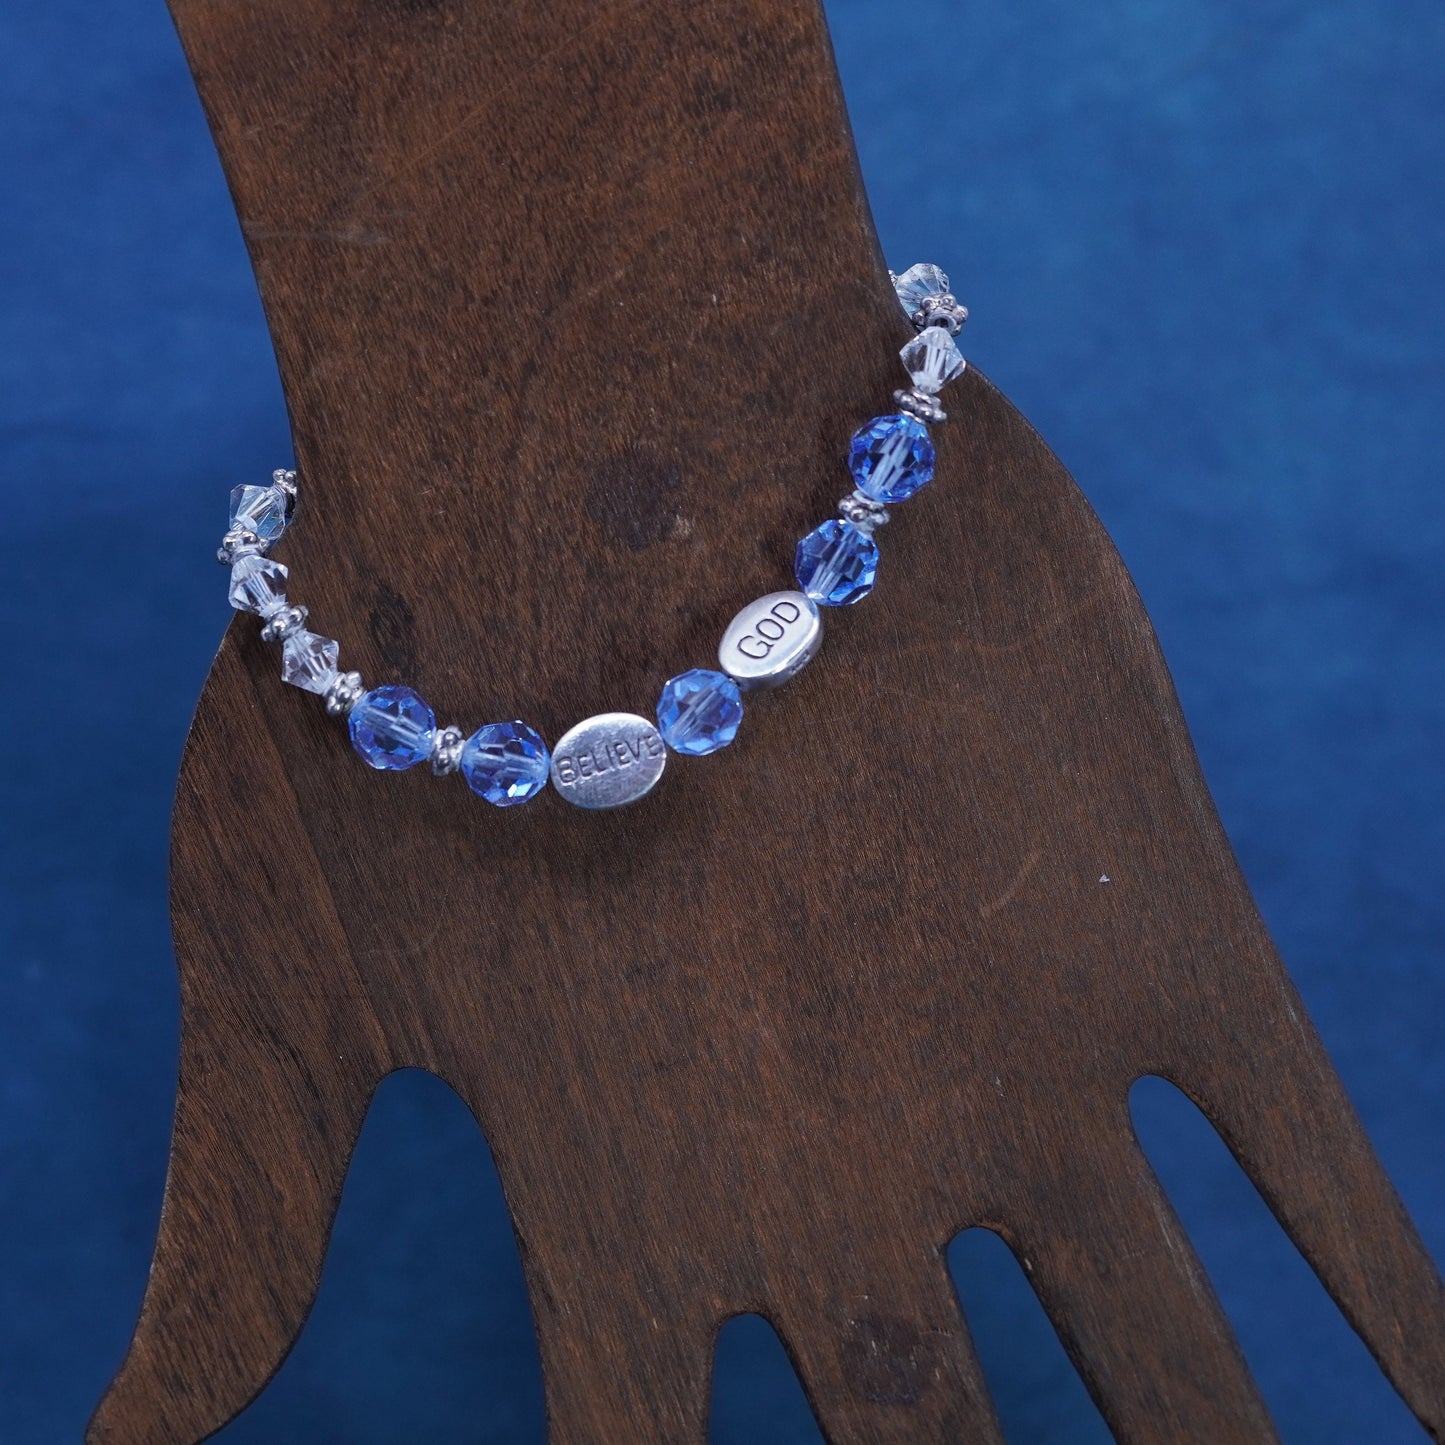 6.75”, Sterling 925 silver bracelet with blue crystal and believe god charms